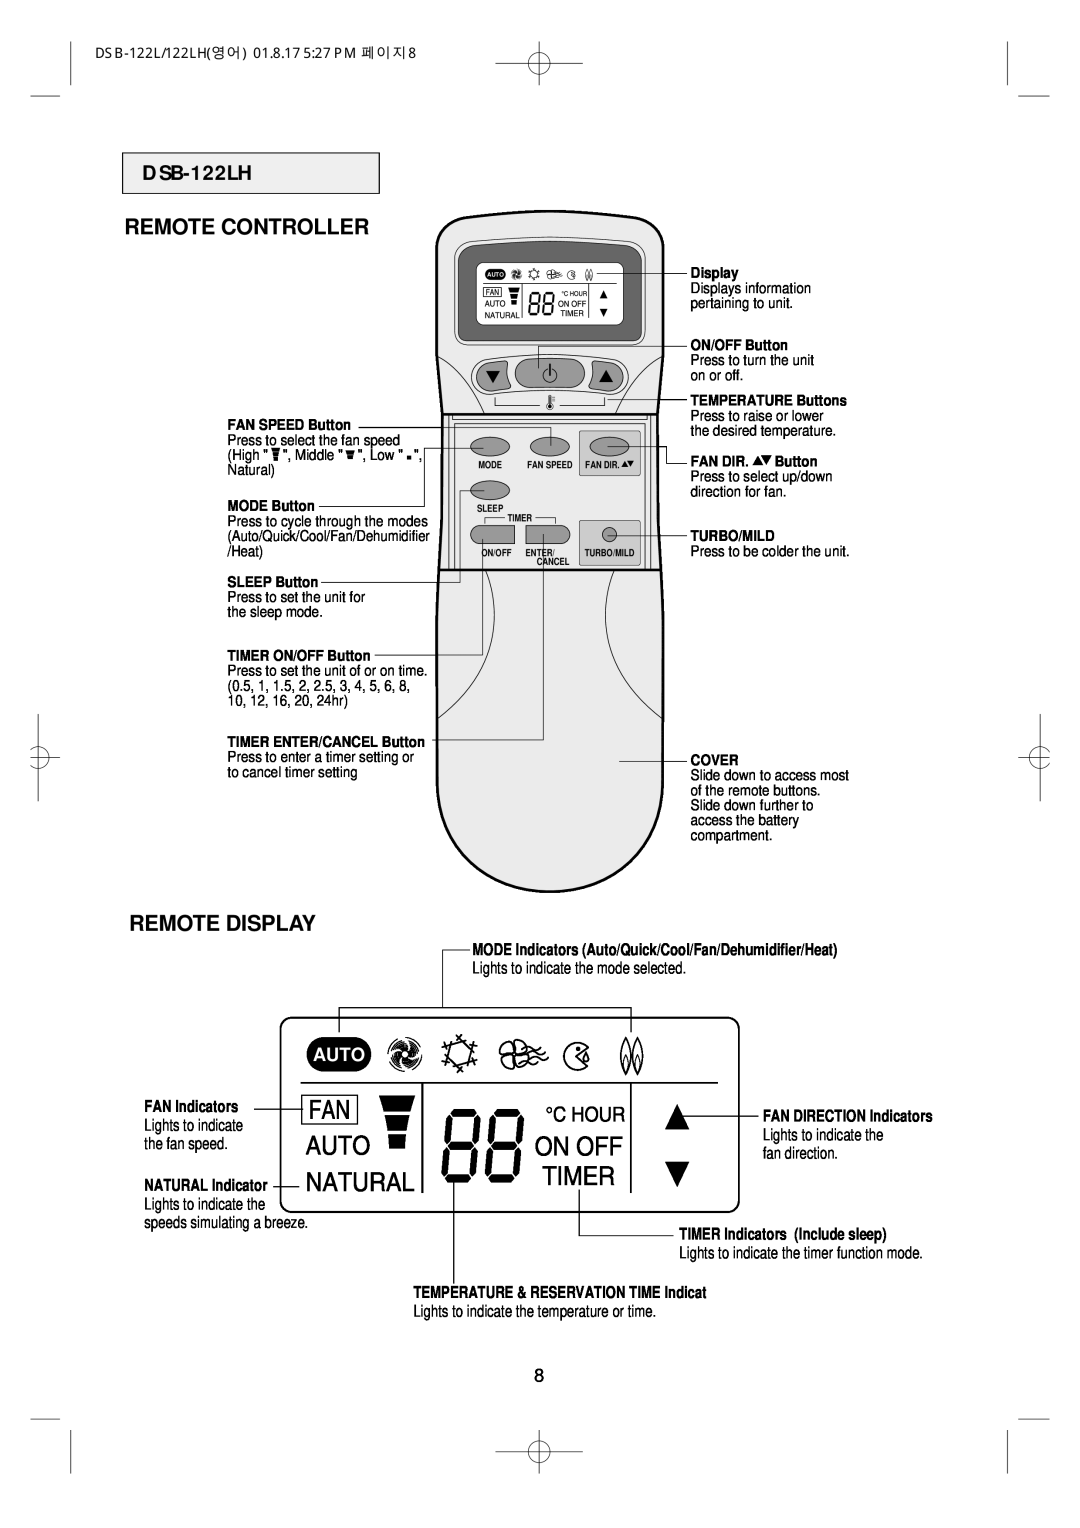 Daewoo owner manual DSB-122LH, Remote Controller, Remote Display, MODE Indicators Auto/Quick/Cool/Fan/Dehumidifier/Heat 